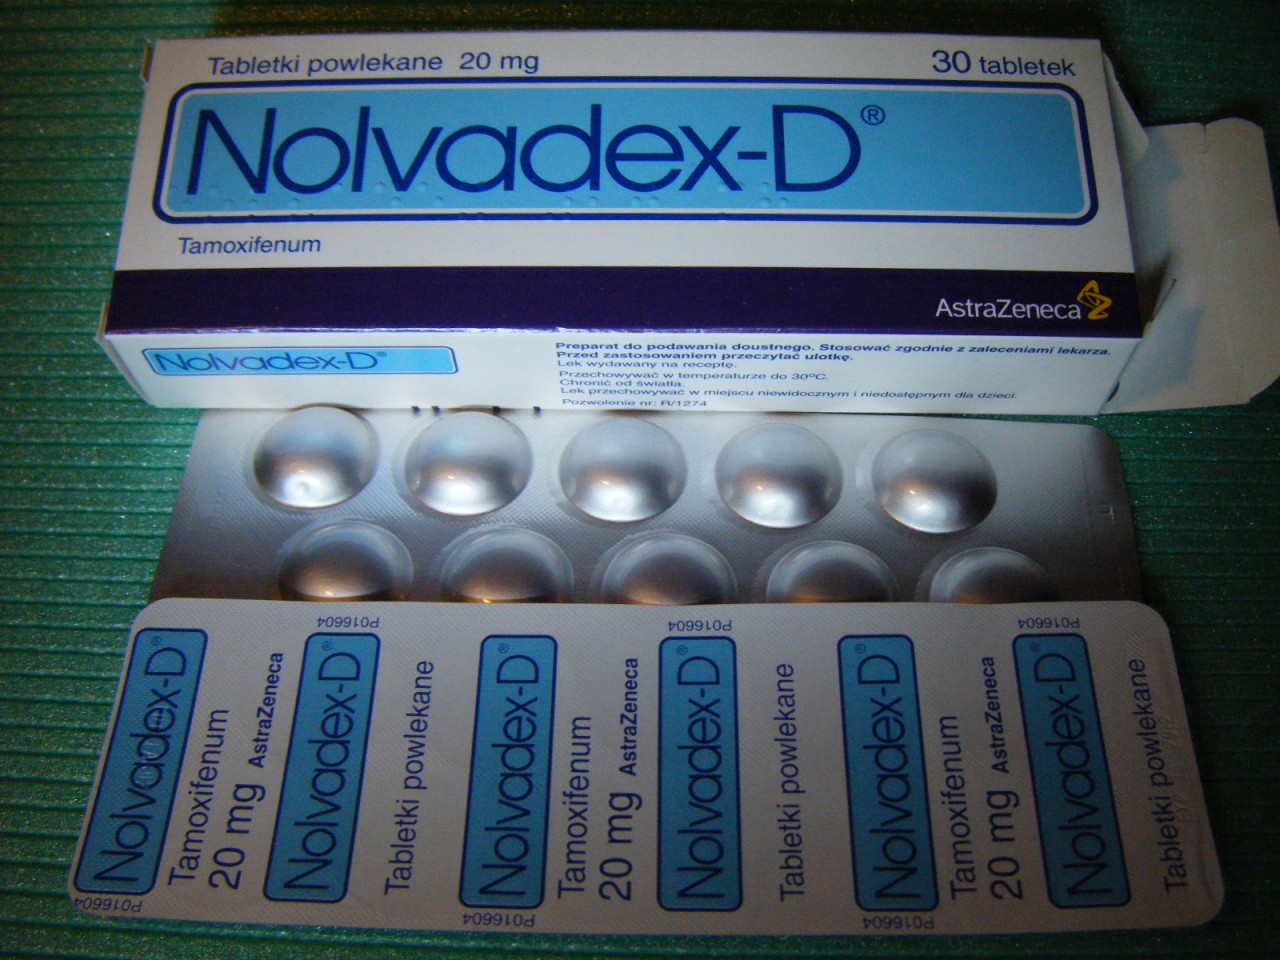 The positive effects and side effects of Nolvadex